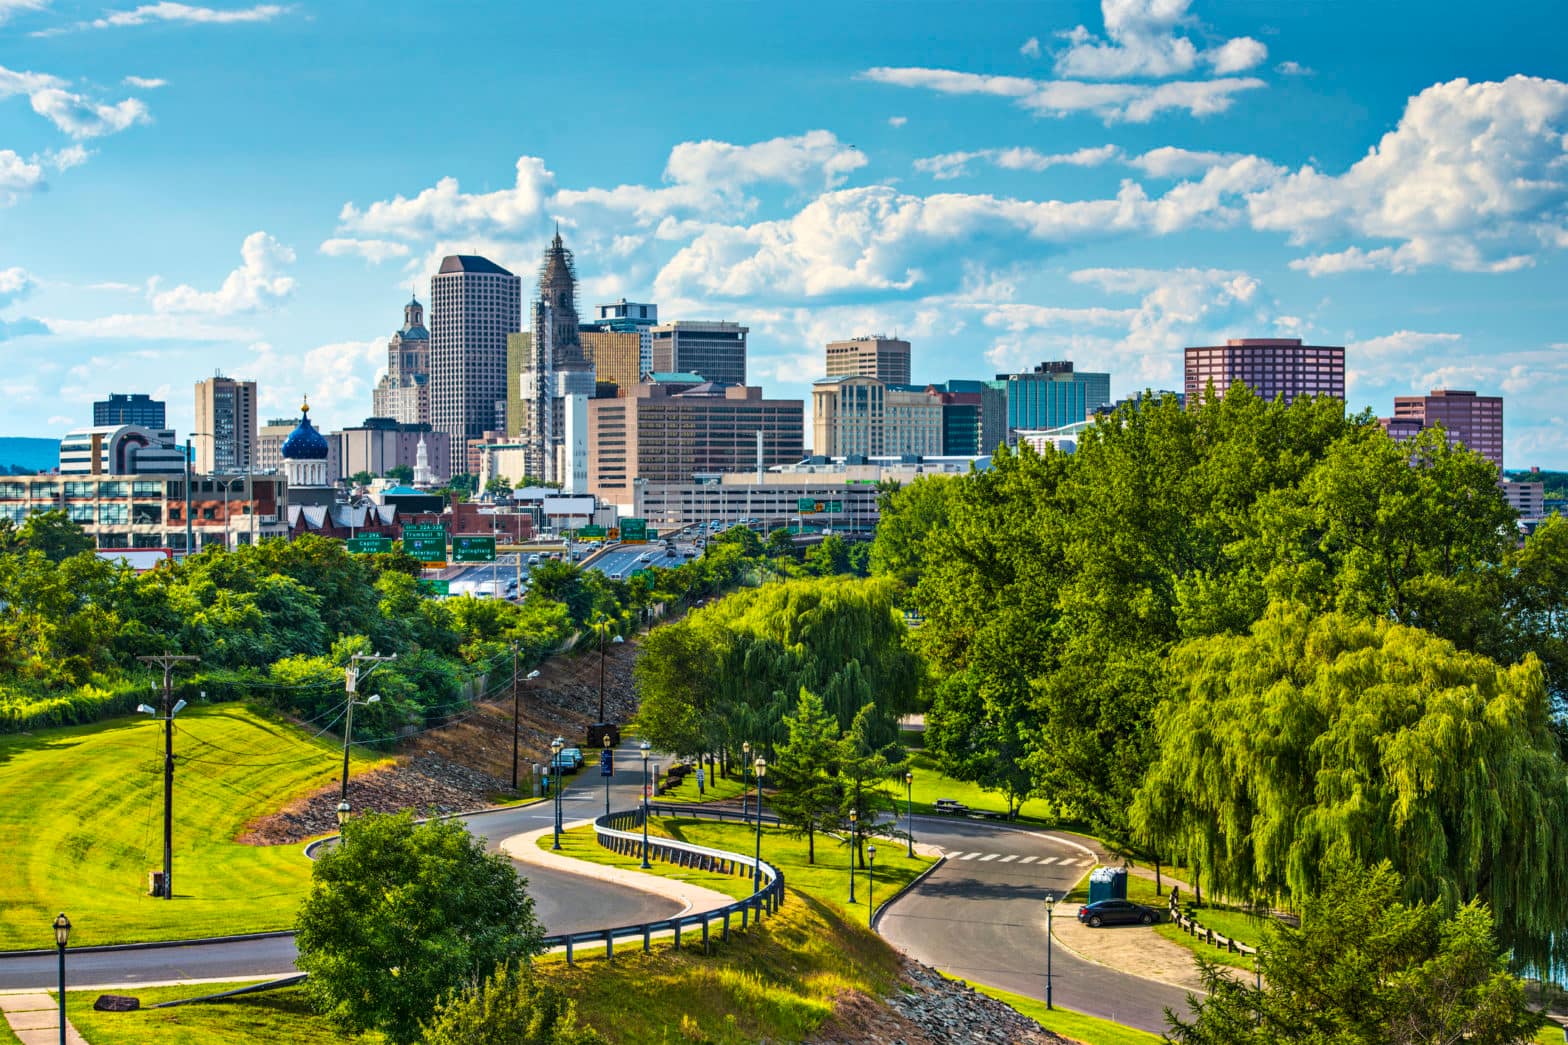 Downtown skyline of Hartford, Connecticut on a sunny day